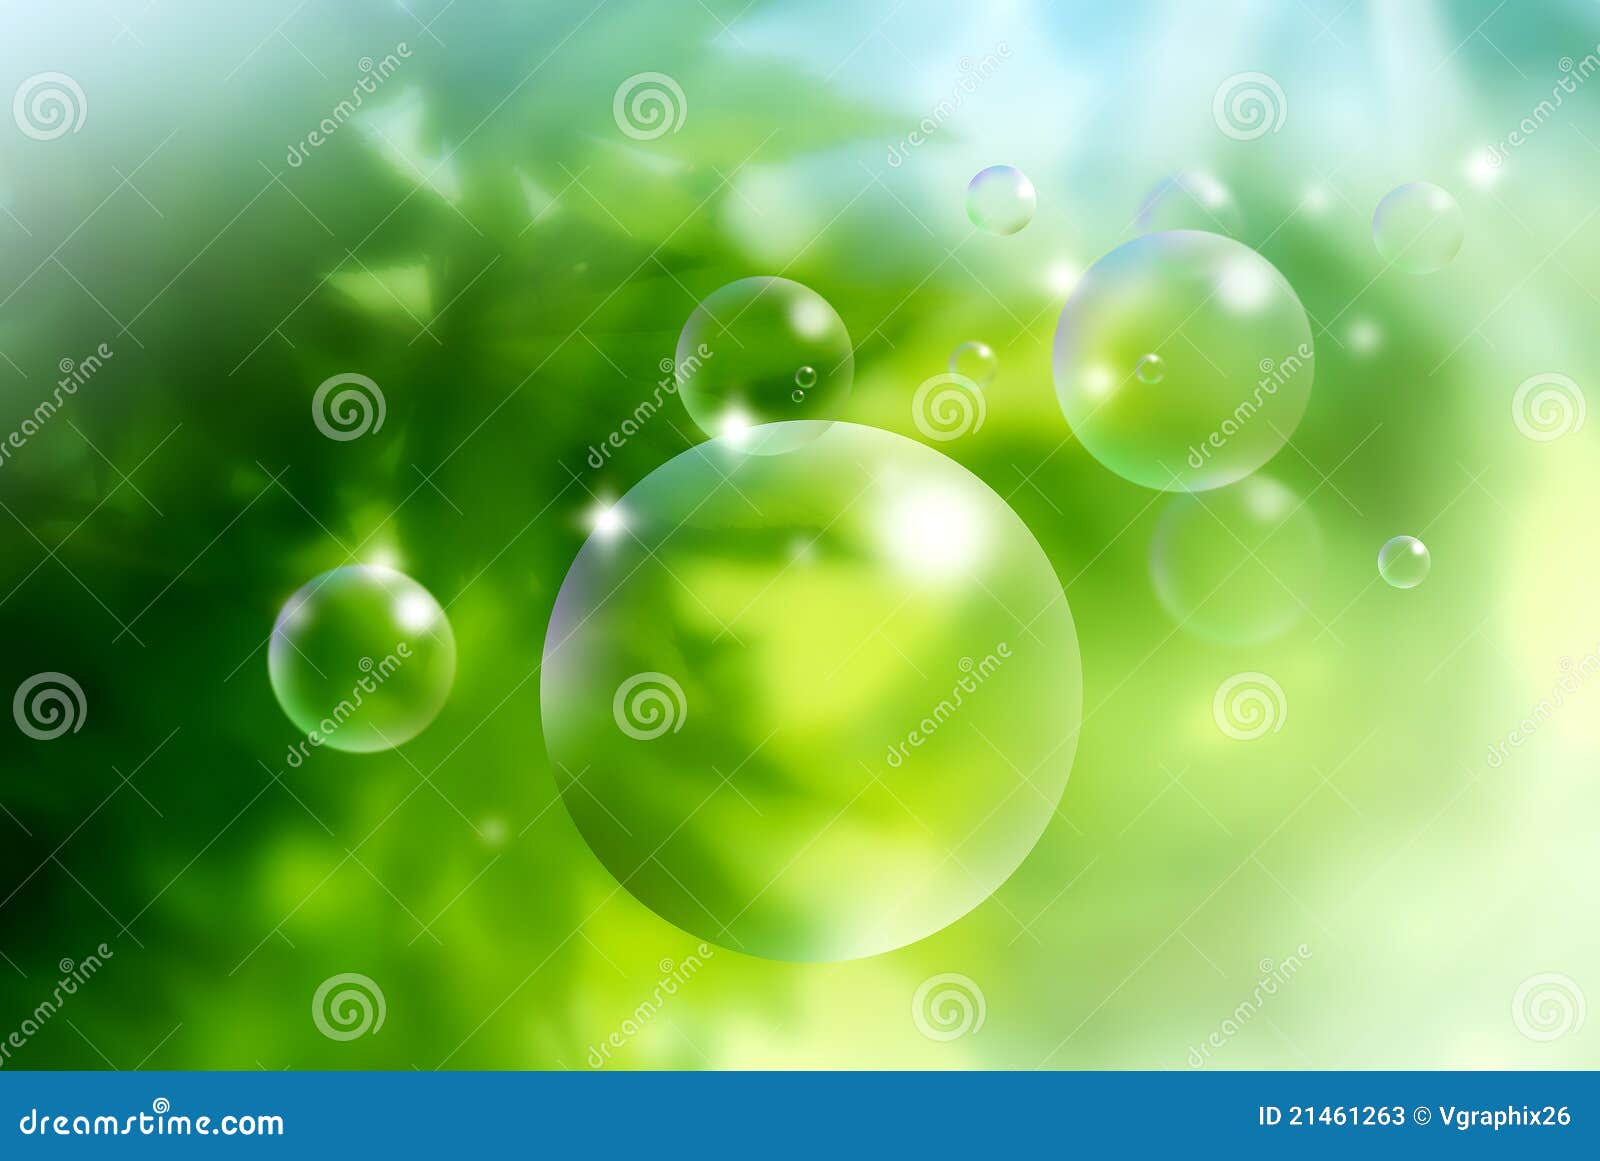 Soap Bubbles On Green Background Stock Photos - Image: 21461263